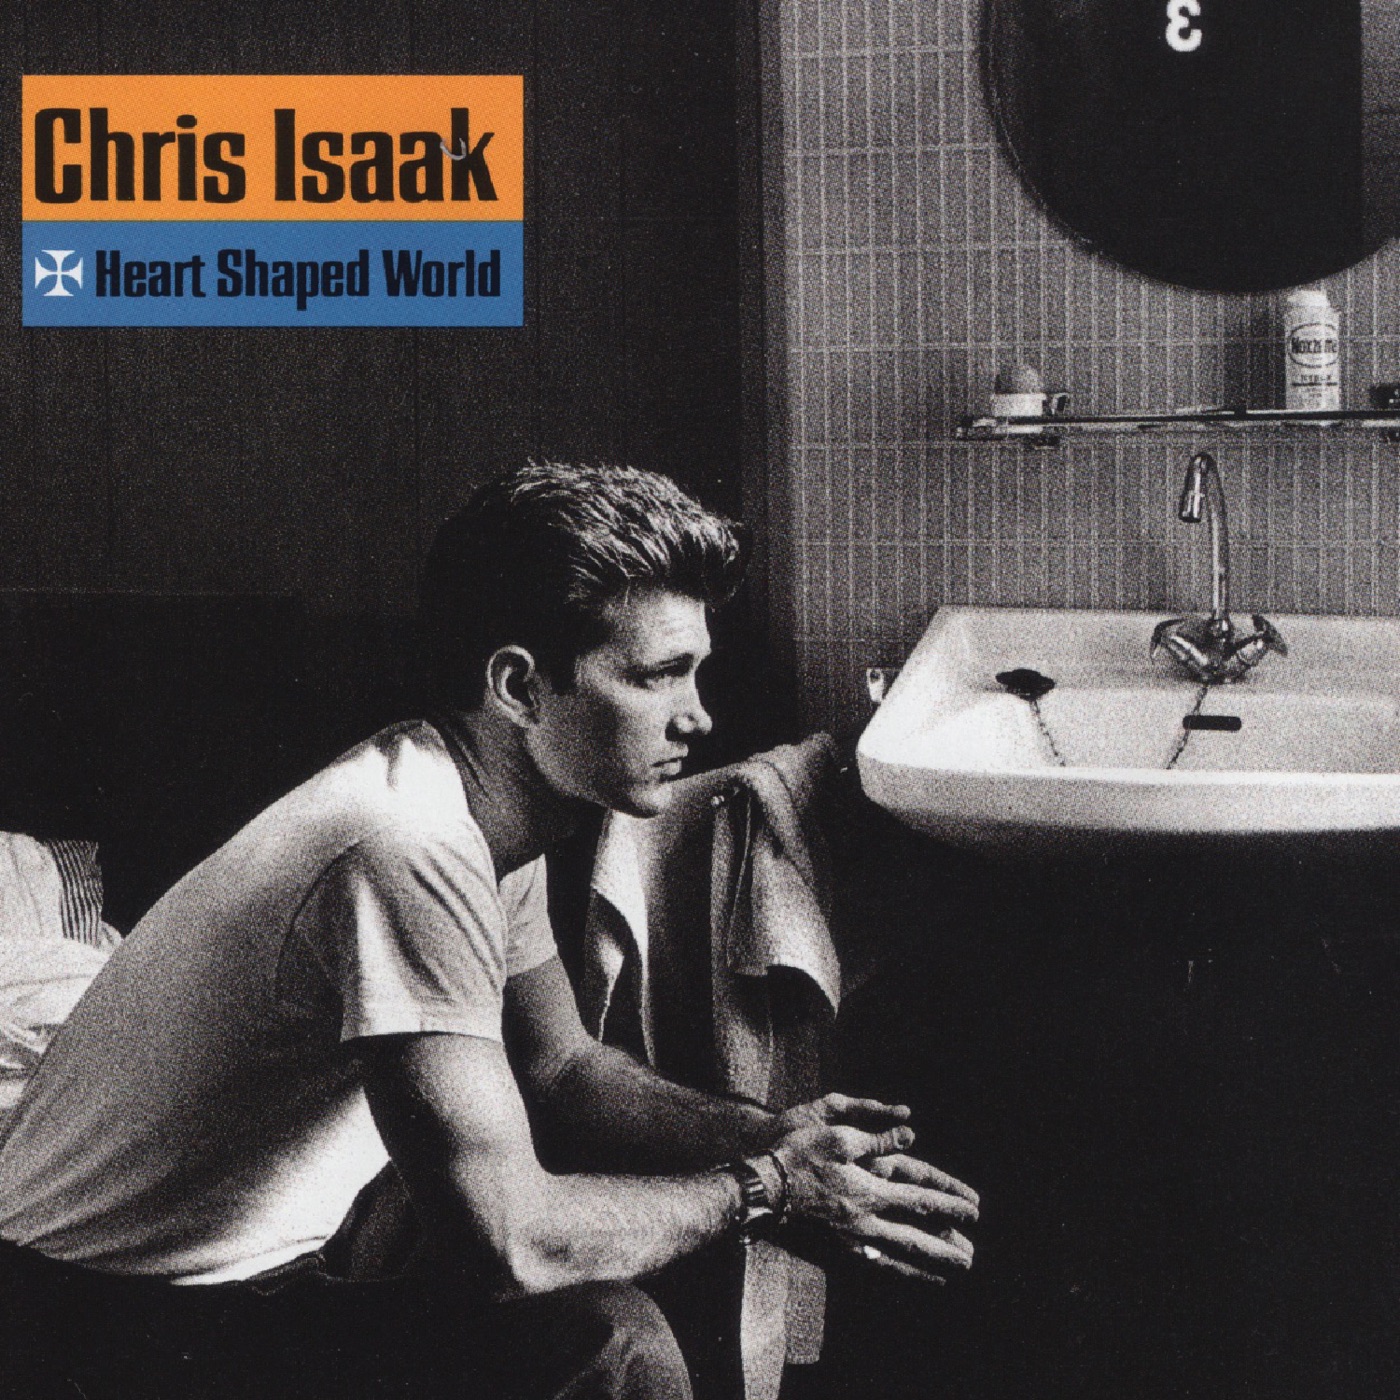 Heart Shaped World by Chris Isaak